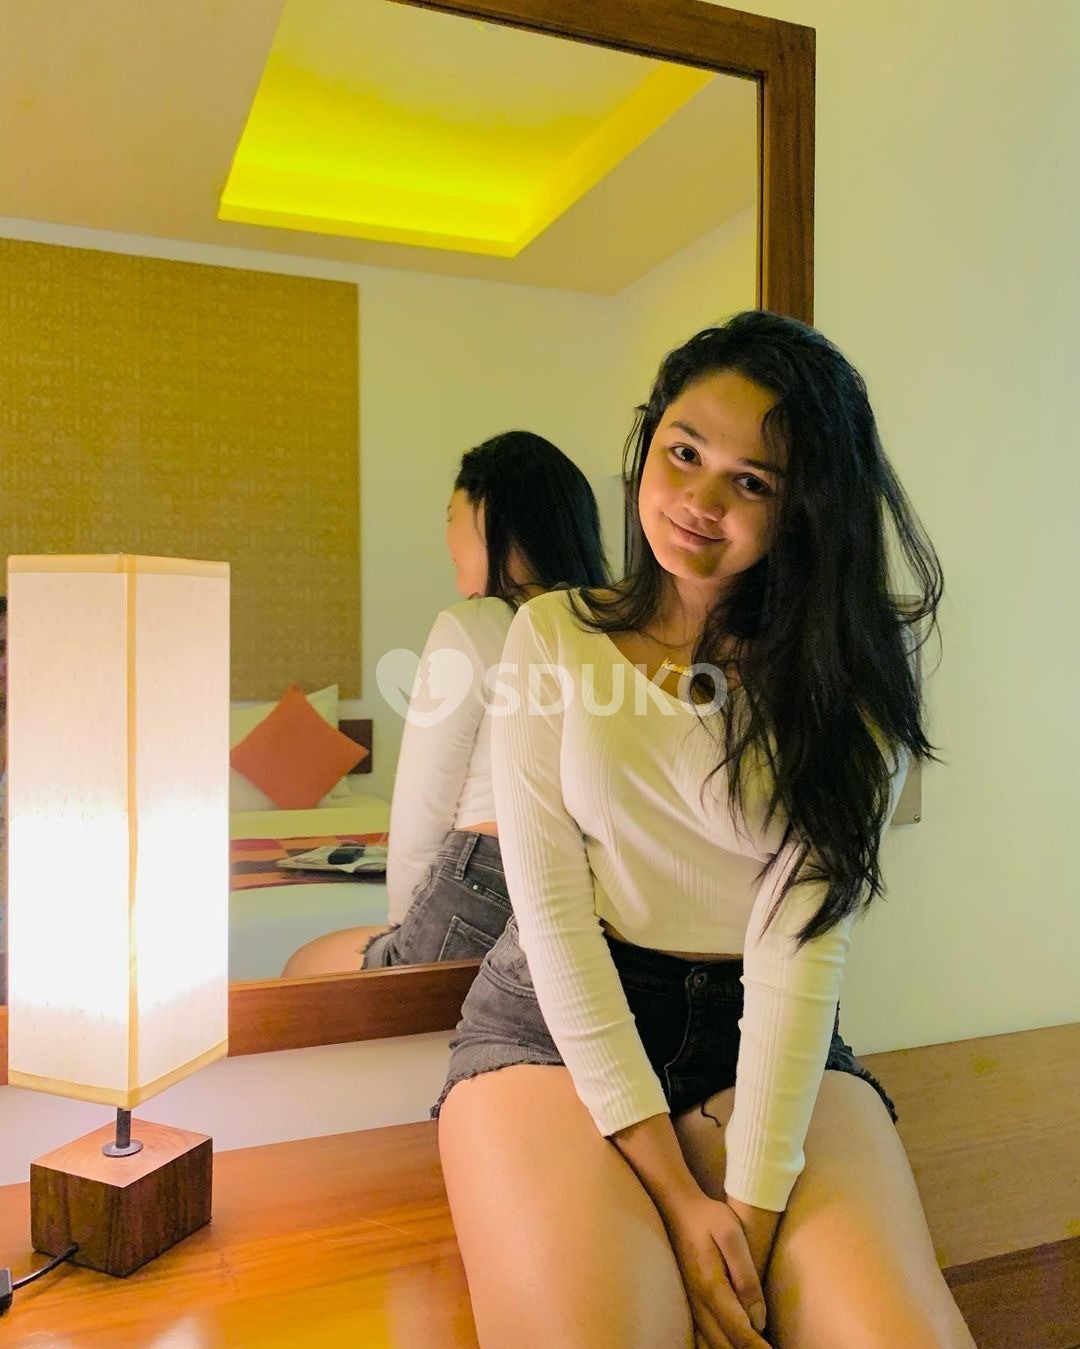 Rourkela PERSONAL ANJALI CALL GIRL SERVICE IN & OUTCALL 🇮🇳TRUSTED full secure.